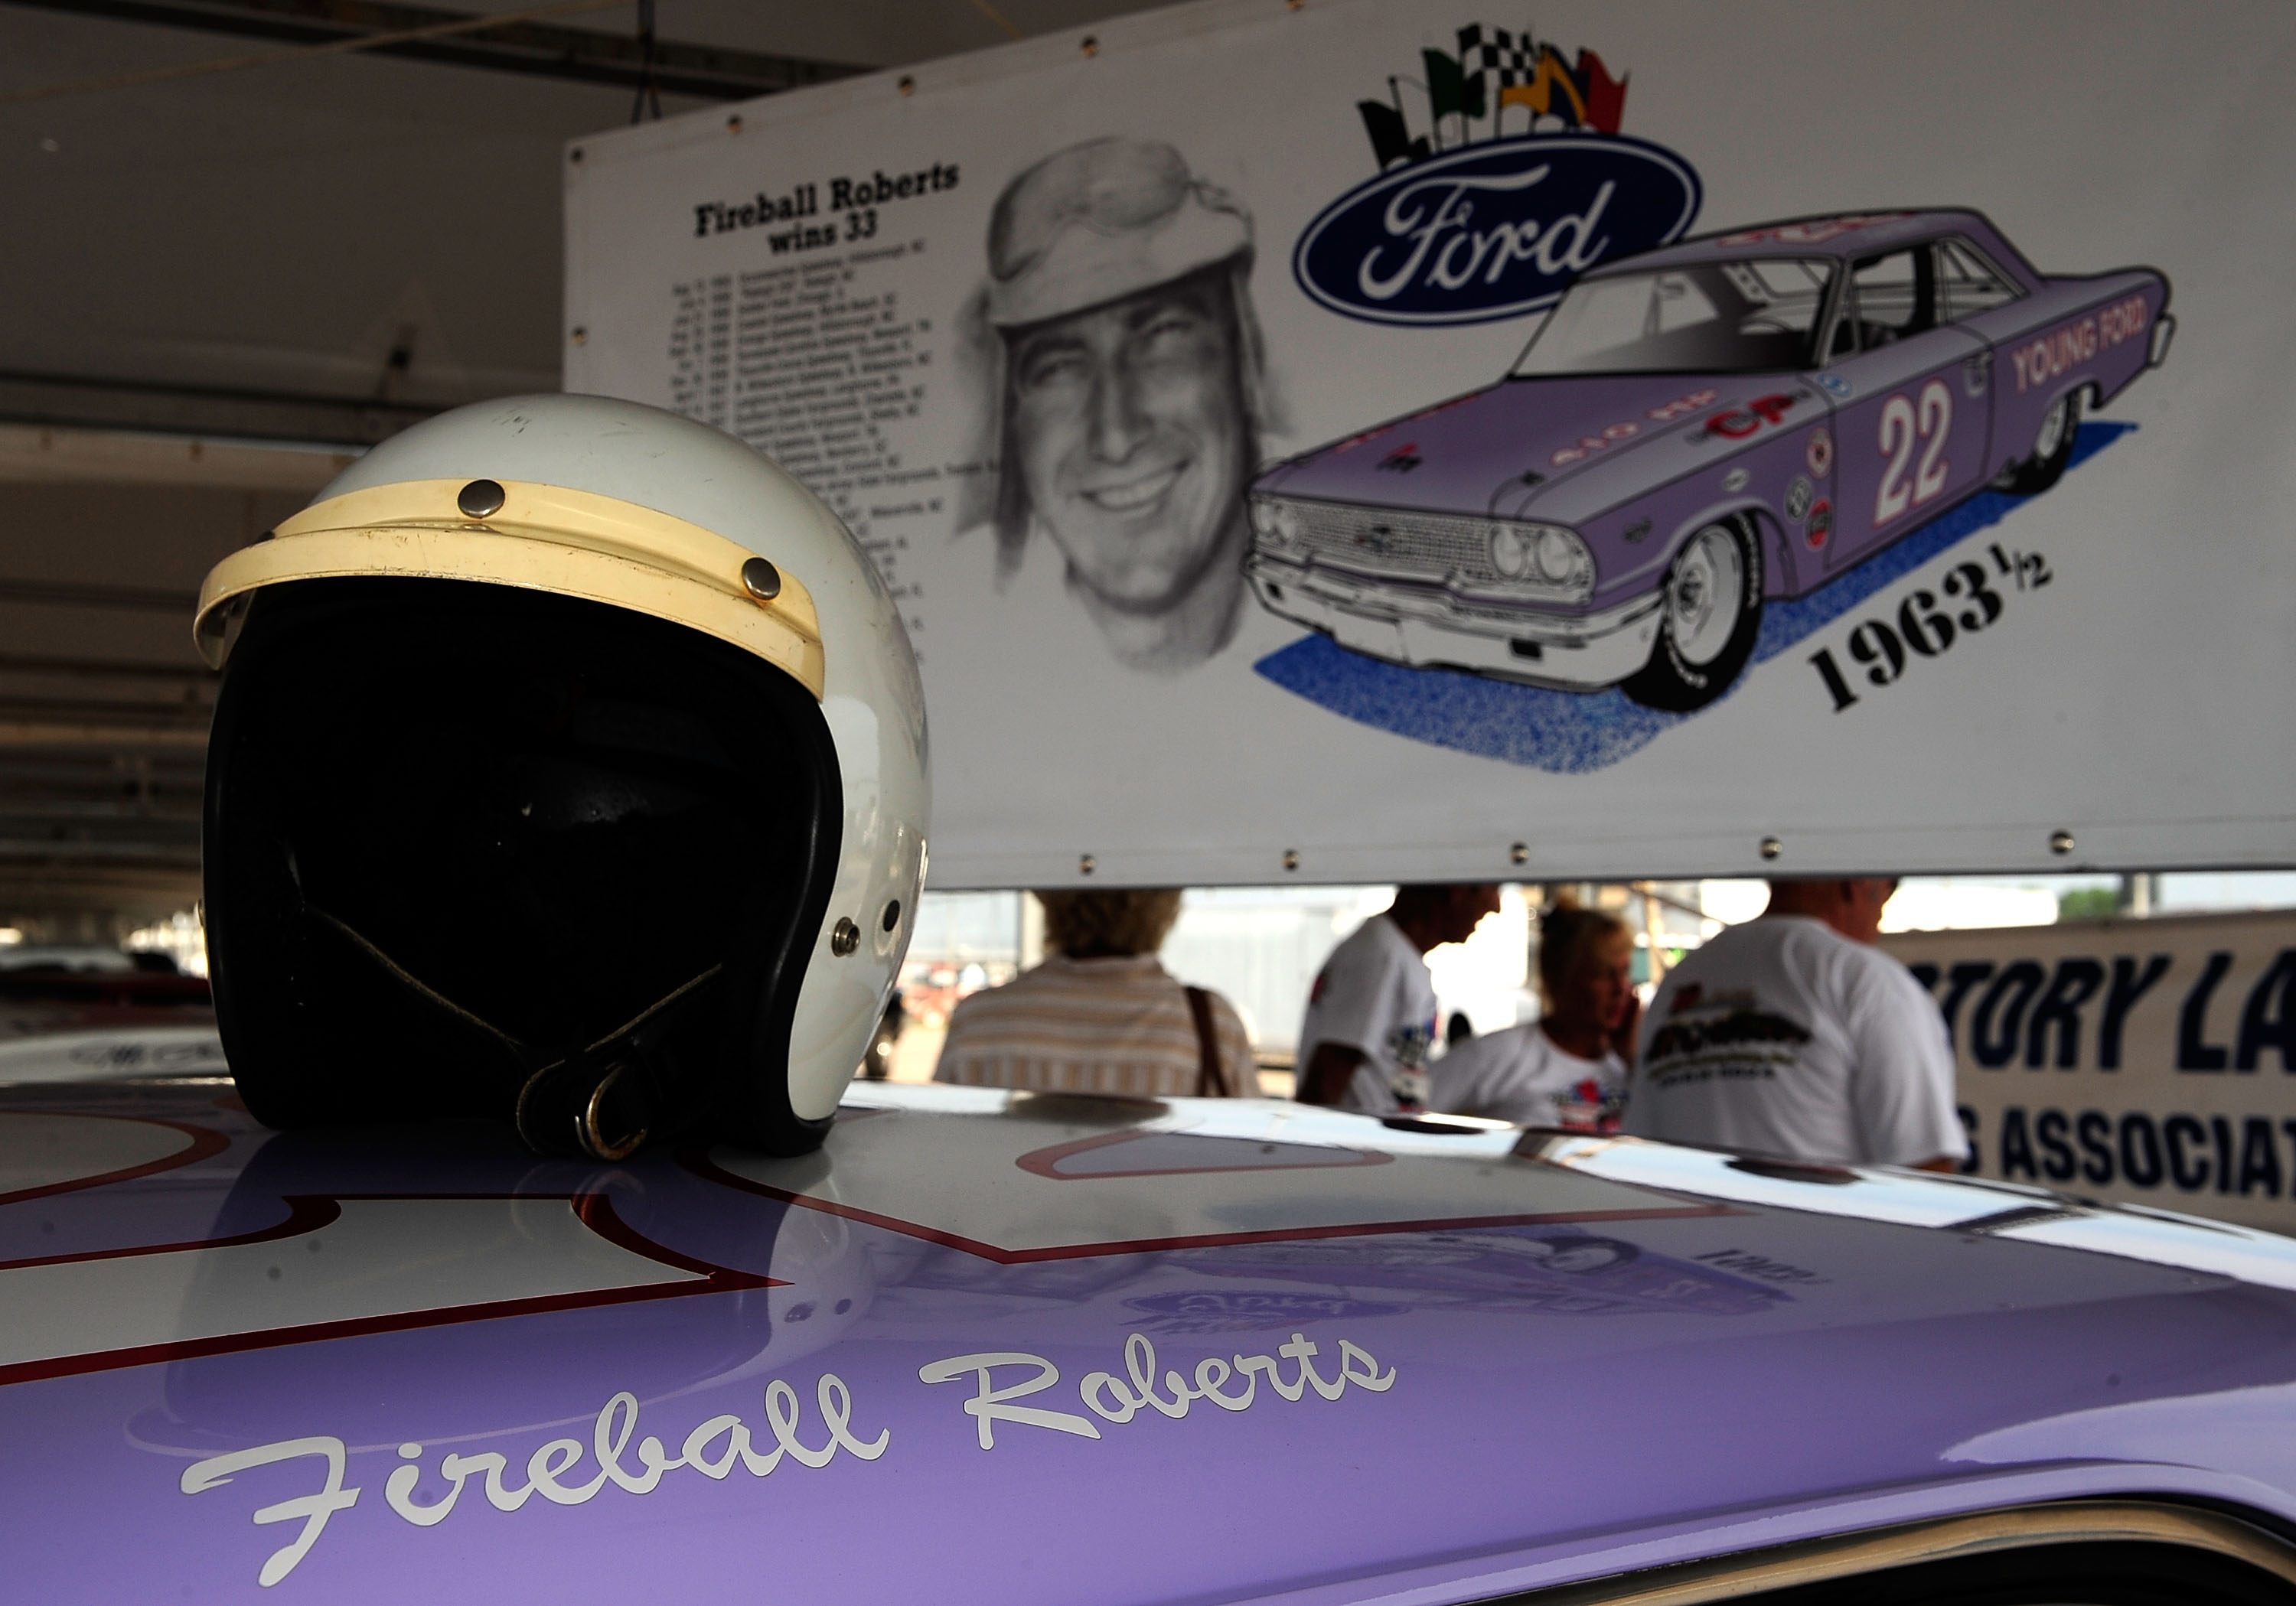 DARLINGTON, SC - AUGUST 31: A display to remember driver Fireball Roberts in the garage area during the Darlington Vintage Racing Festival at Darlington  Raceway on August 31, 2008 in Darlington, South Carolina.  (Photo by Rusty Jarrett/Getty Images)